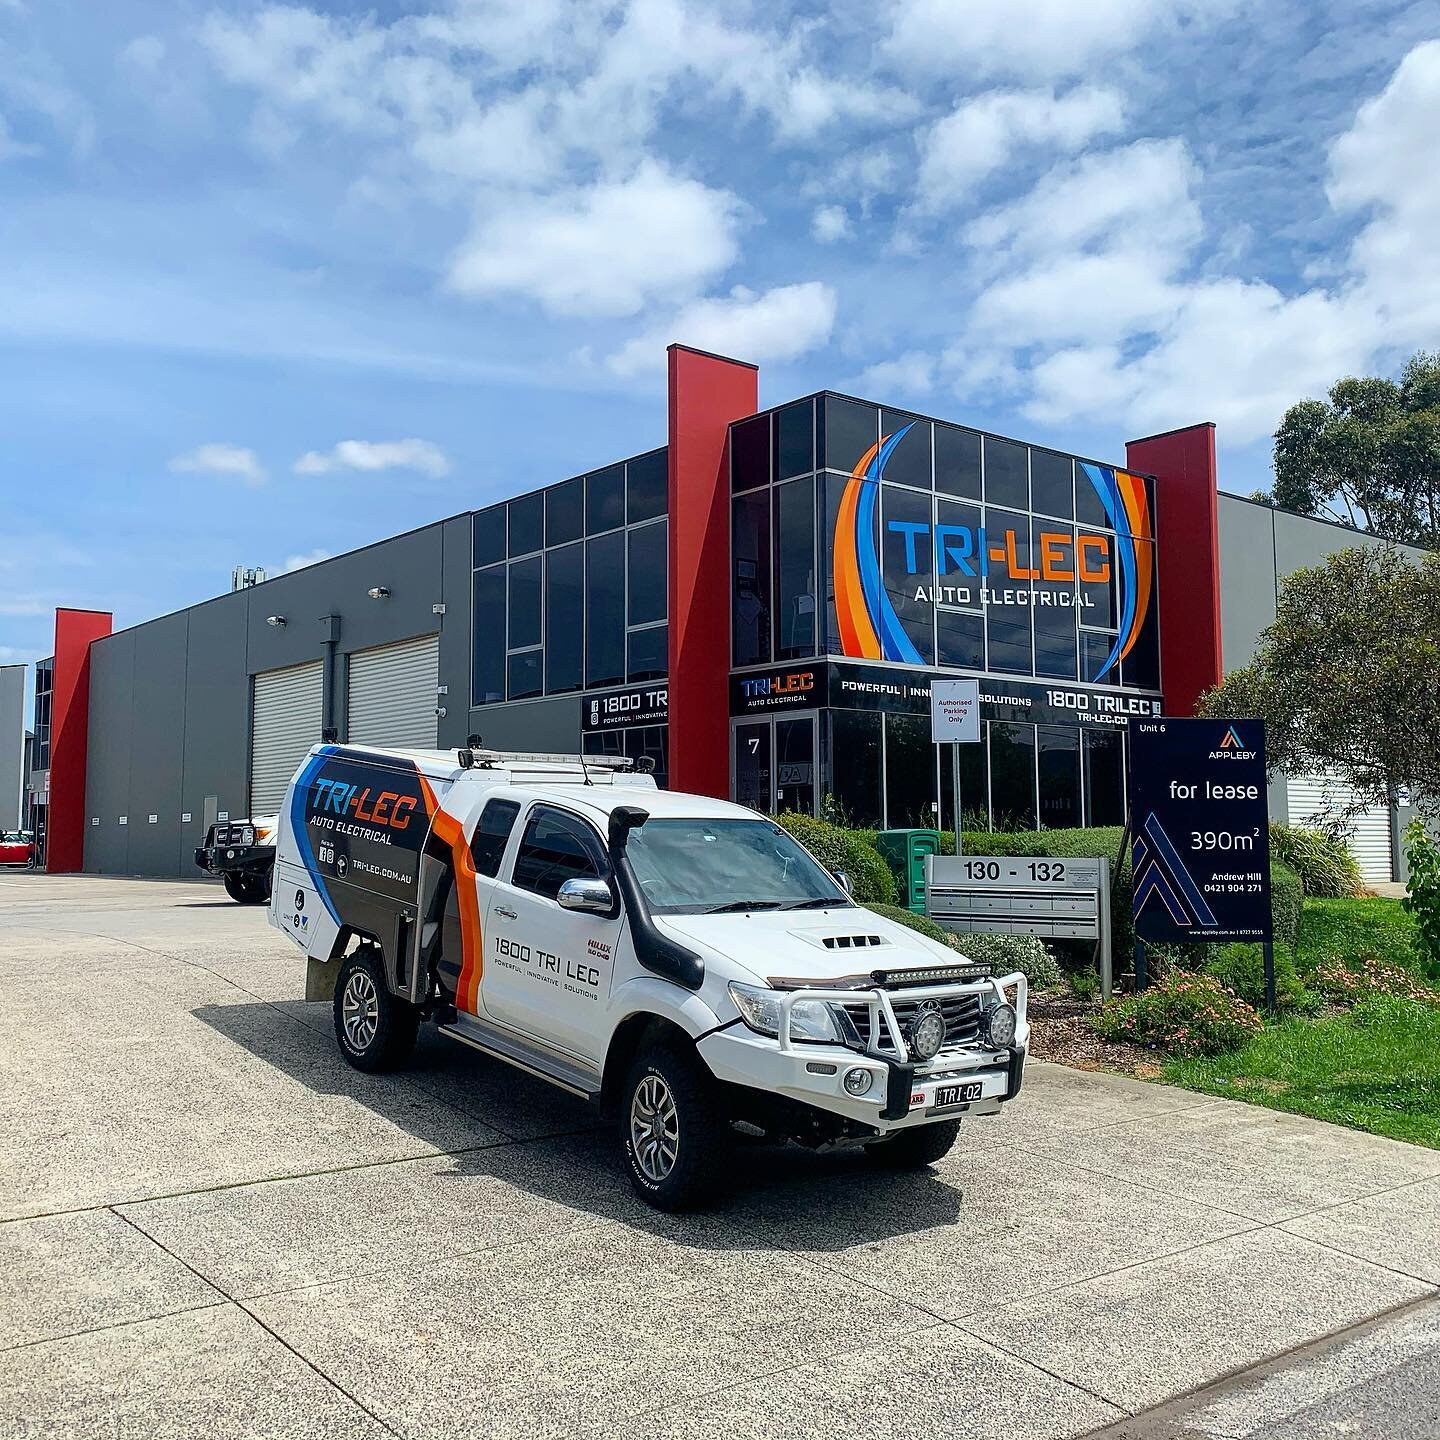 It&rsquo;s hard to believe that service vehicle number 5 rolls out of the shop tomorrow supporting our valued clients across the civil, mining and construction sectors across Victoria .
From humble beginnings it&rsquo;s amazing what can be achieved f